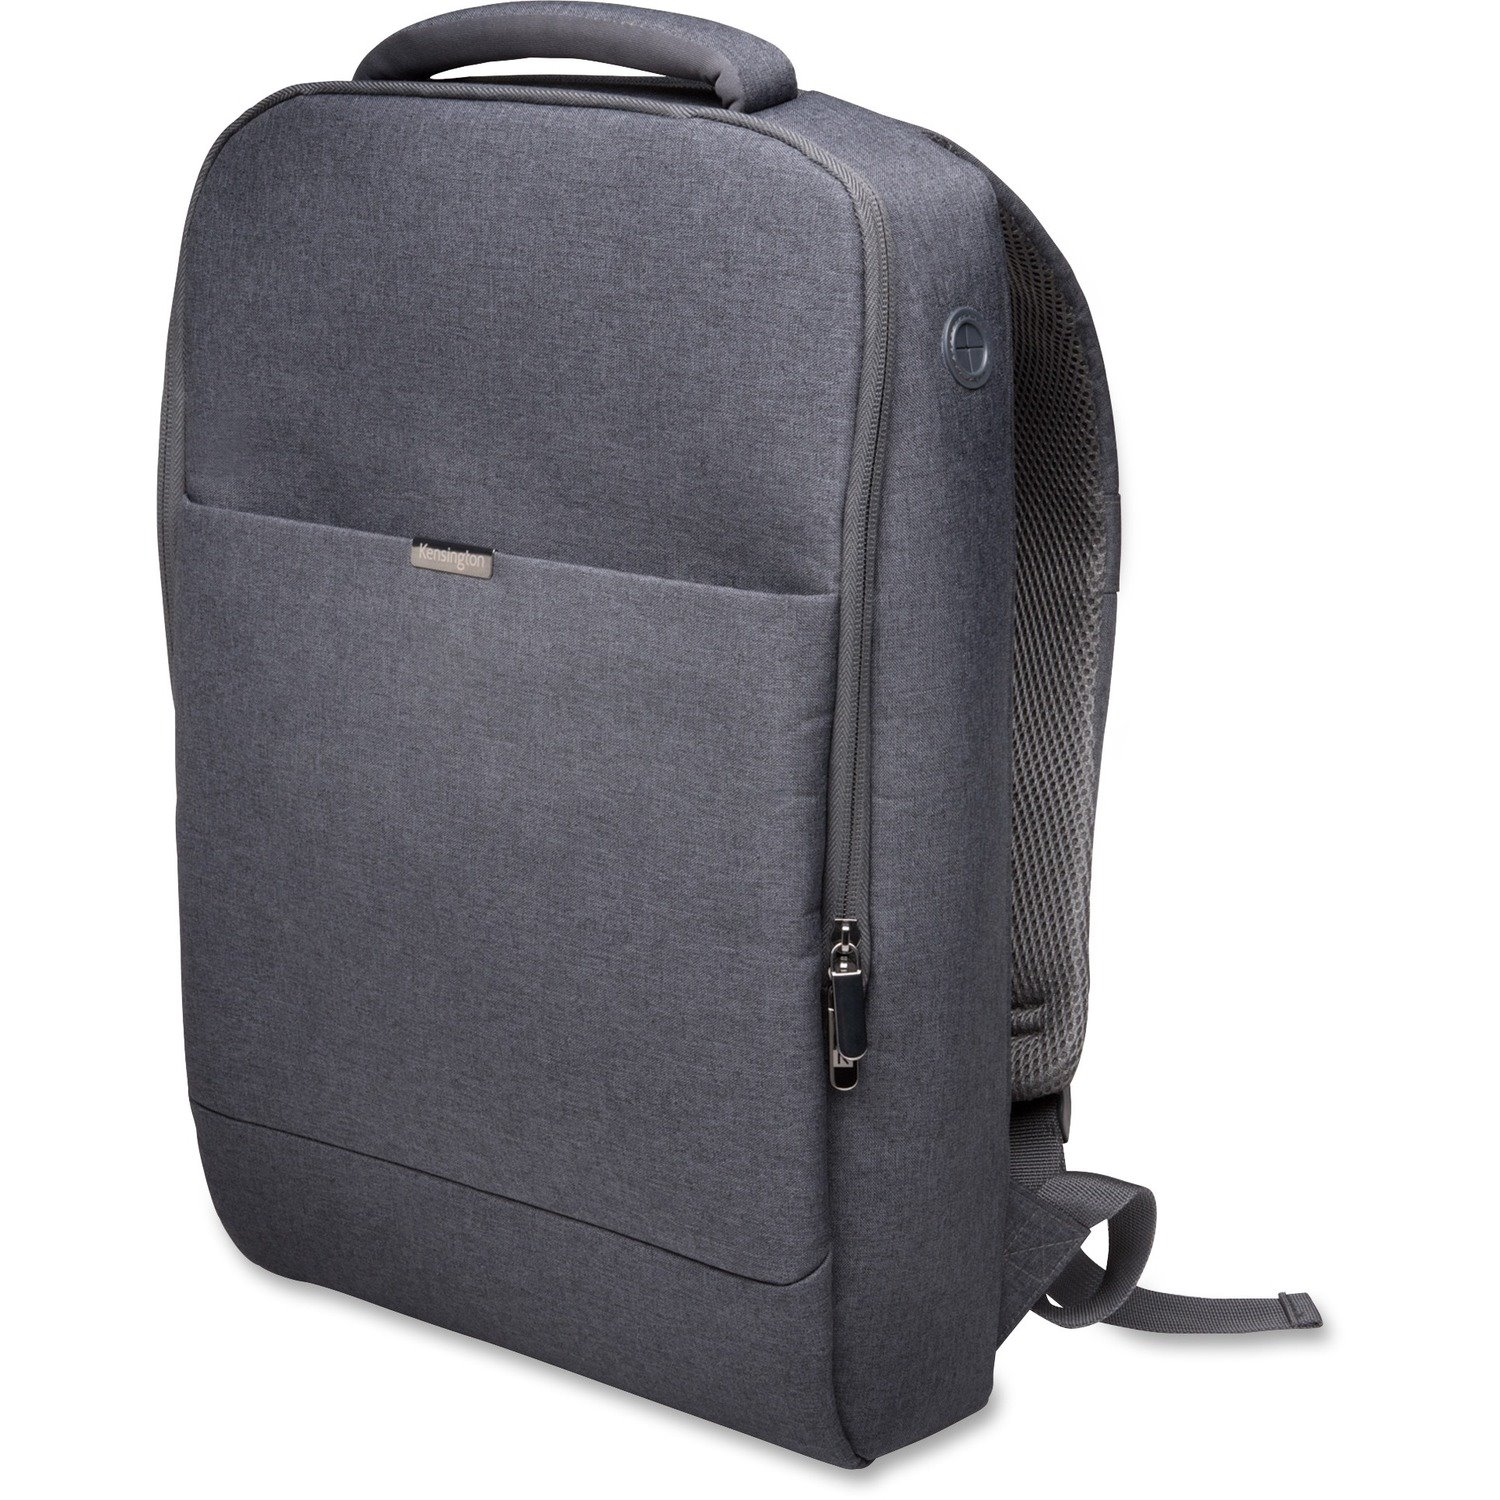 Kensington 62622 Carrying Case (Backpack) for 15.6" Notebook - Cool Gray